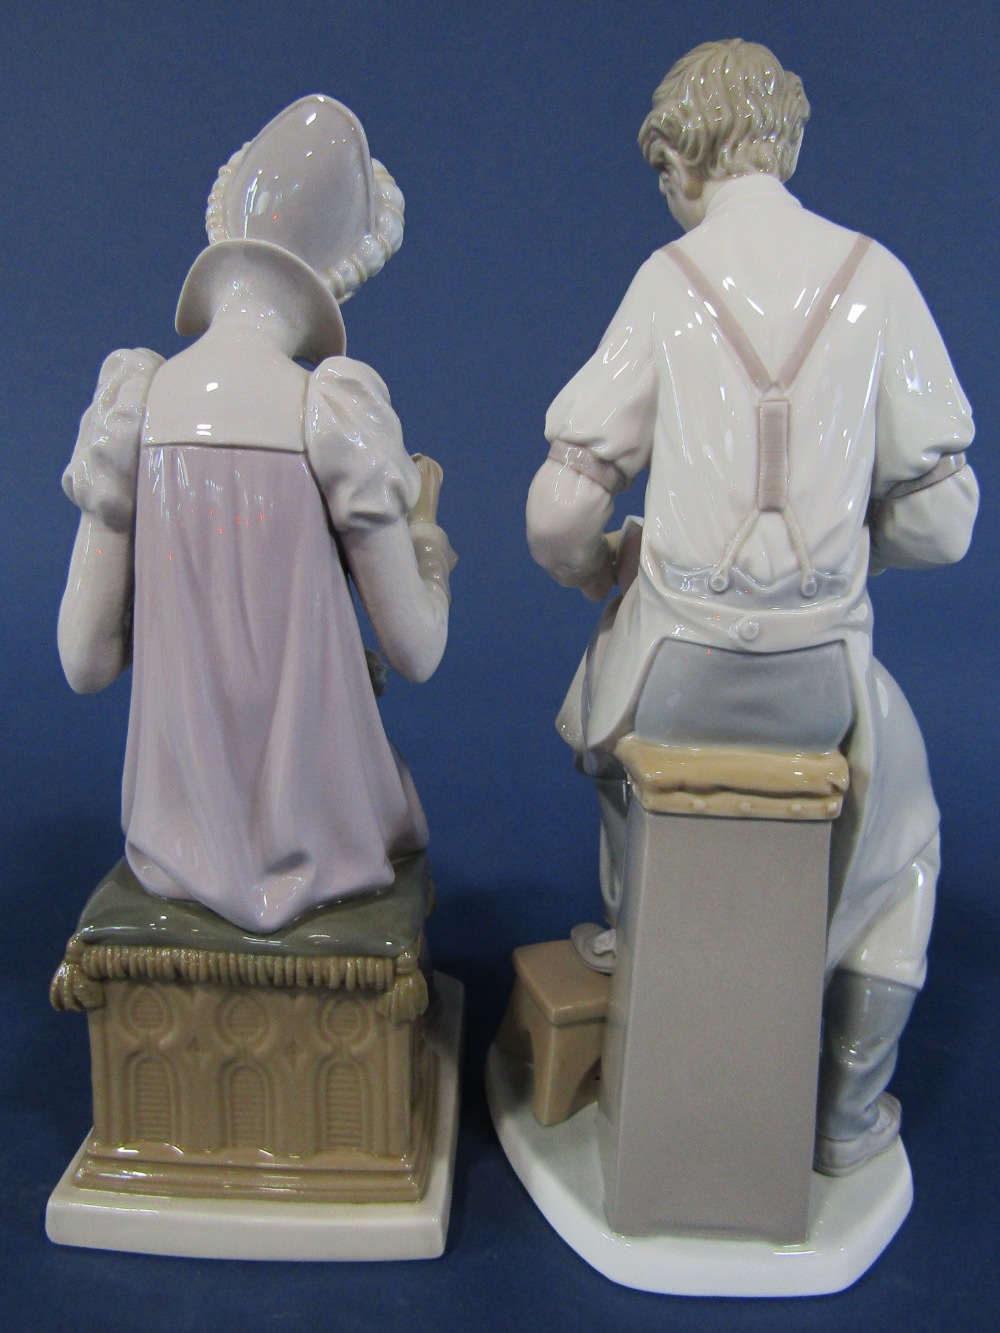 A Lladro Daisa figure of an alchemist, together with a Lladro Daisa figure of a woman with her - Image 2 of 3